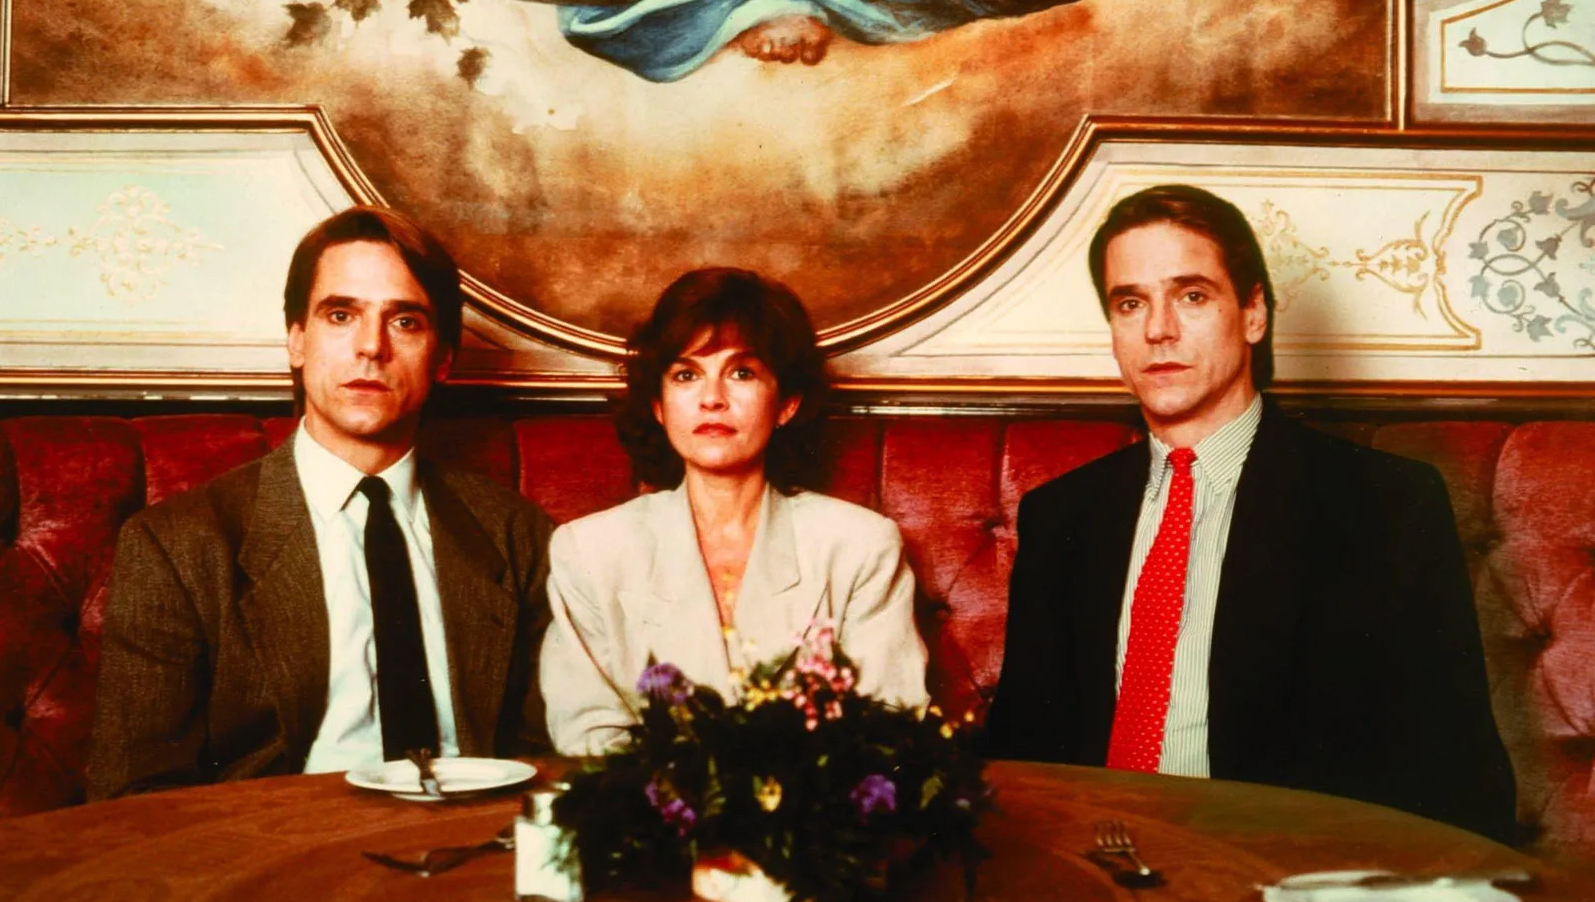 Twin brothers sit at a restaurant—one with a red tie, one with a black tie—with a woman between them, all looking at camera.